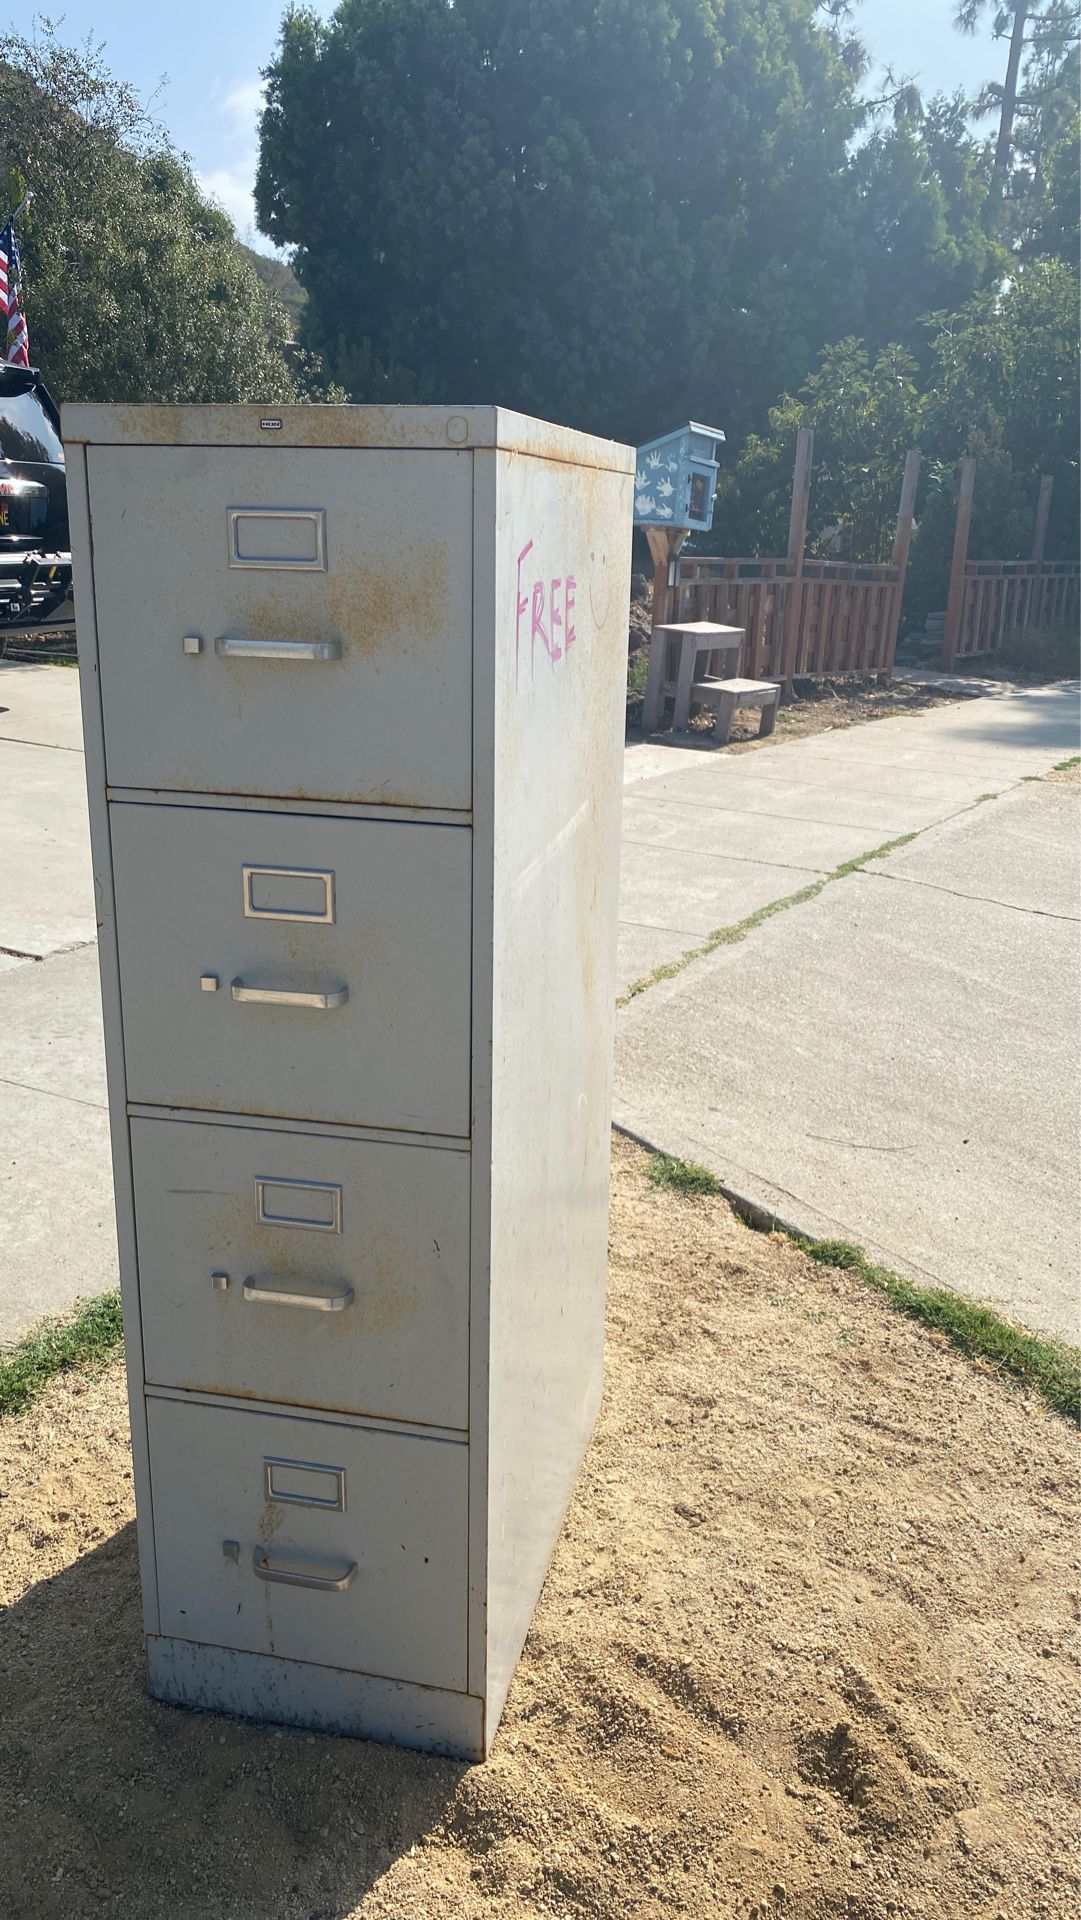 Free metal filing cabinet with drawers